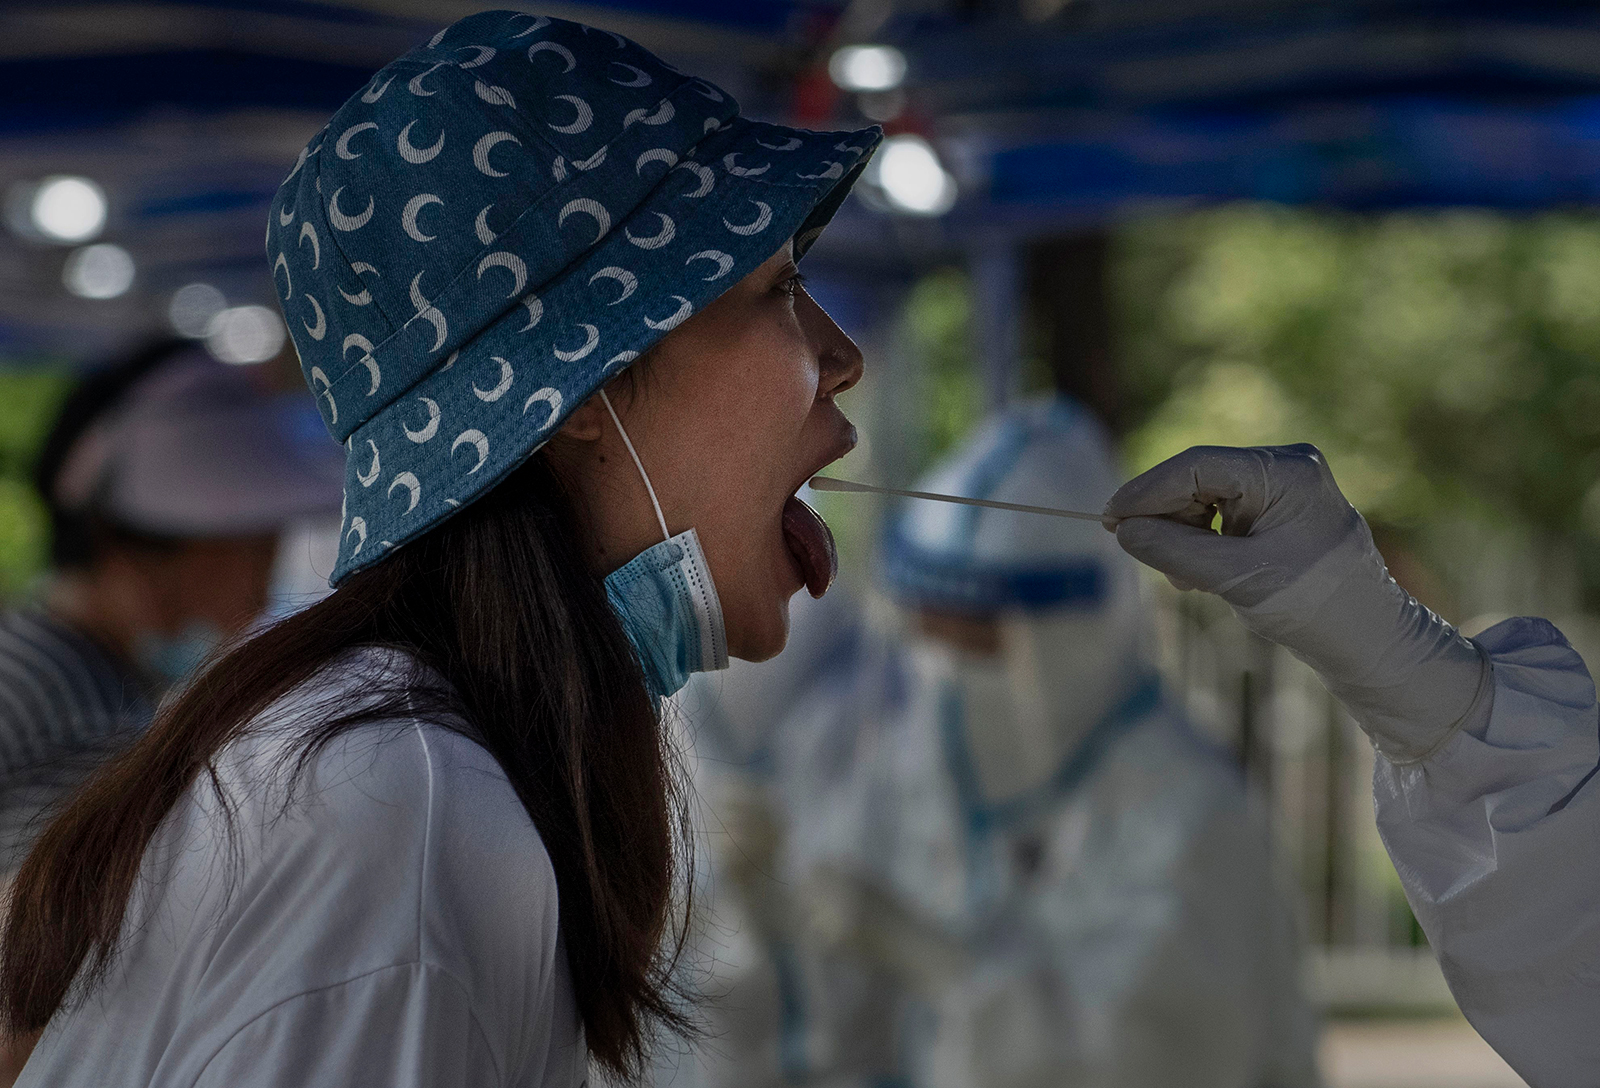 A Chinese epidemic control worker performs a nucleic acid swab test for Covid-19 on a woman at a government testing site on June 22, in Beijing.